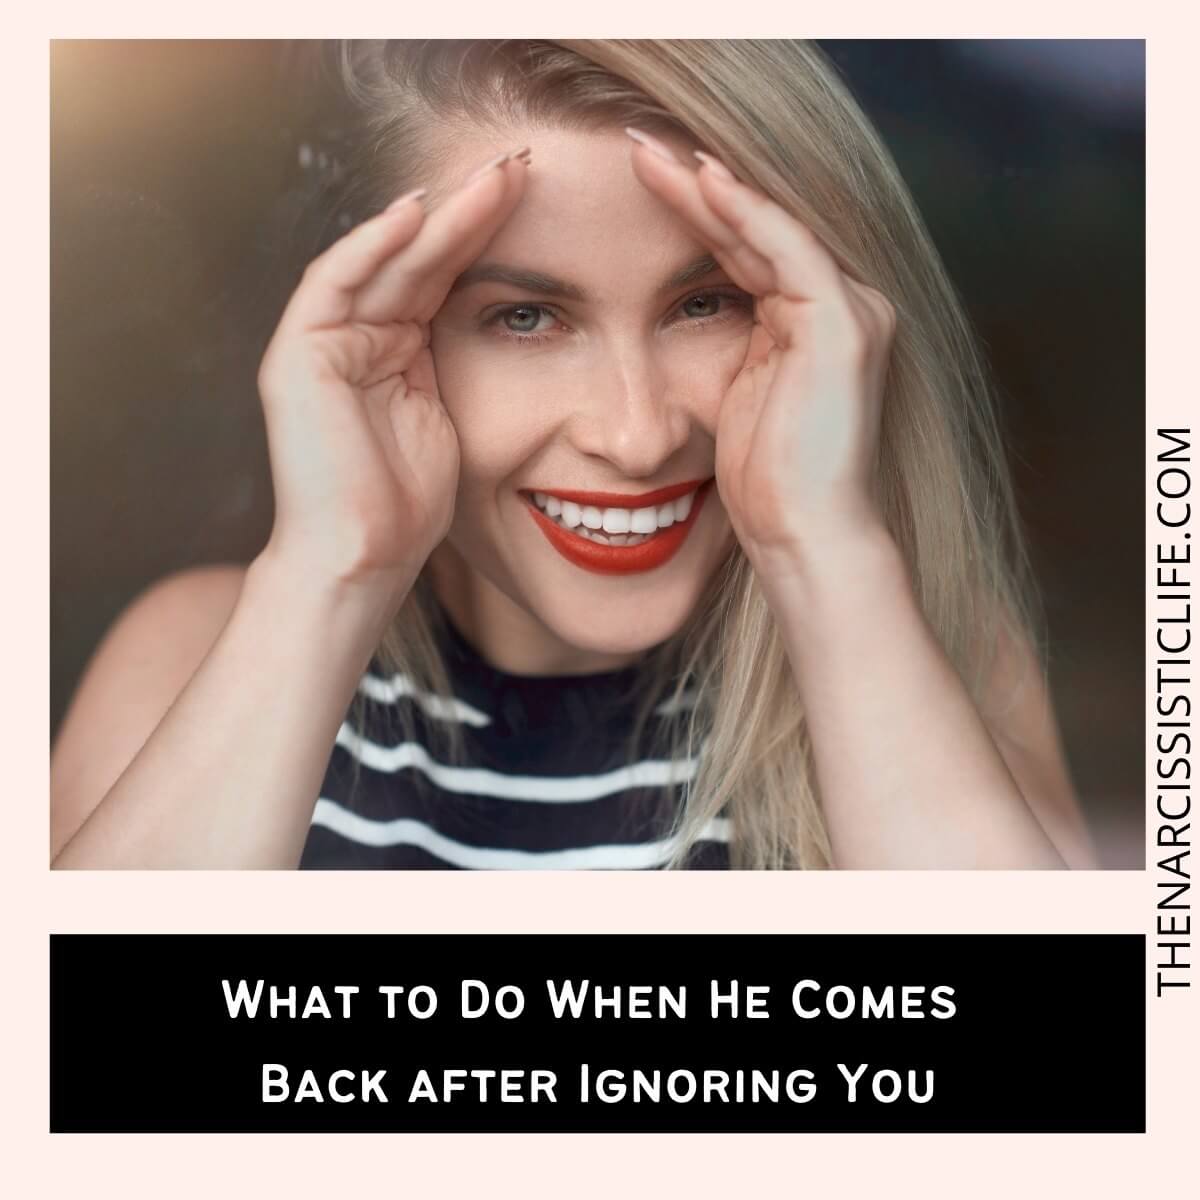 When a man ignores you ignore him back